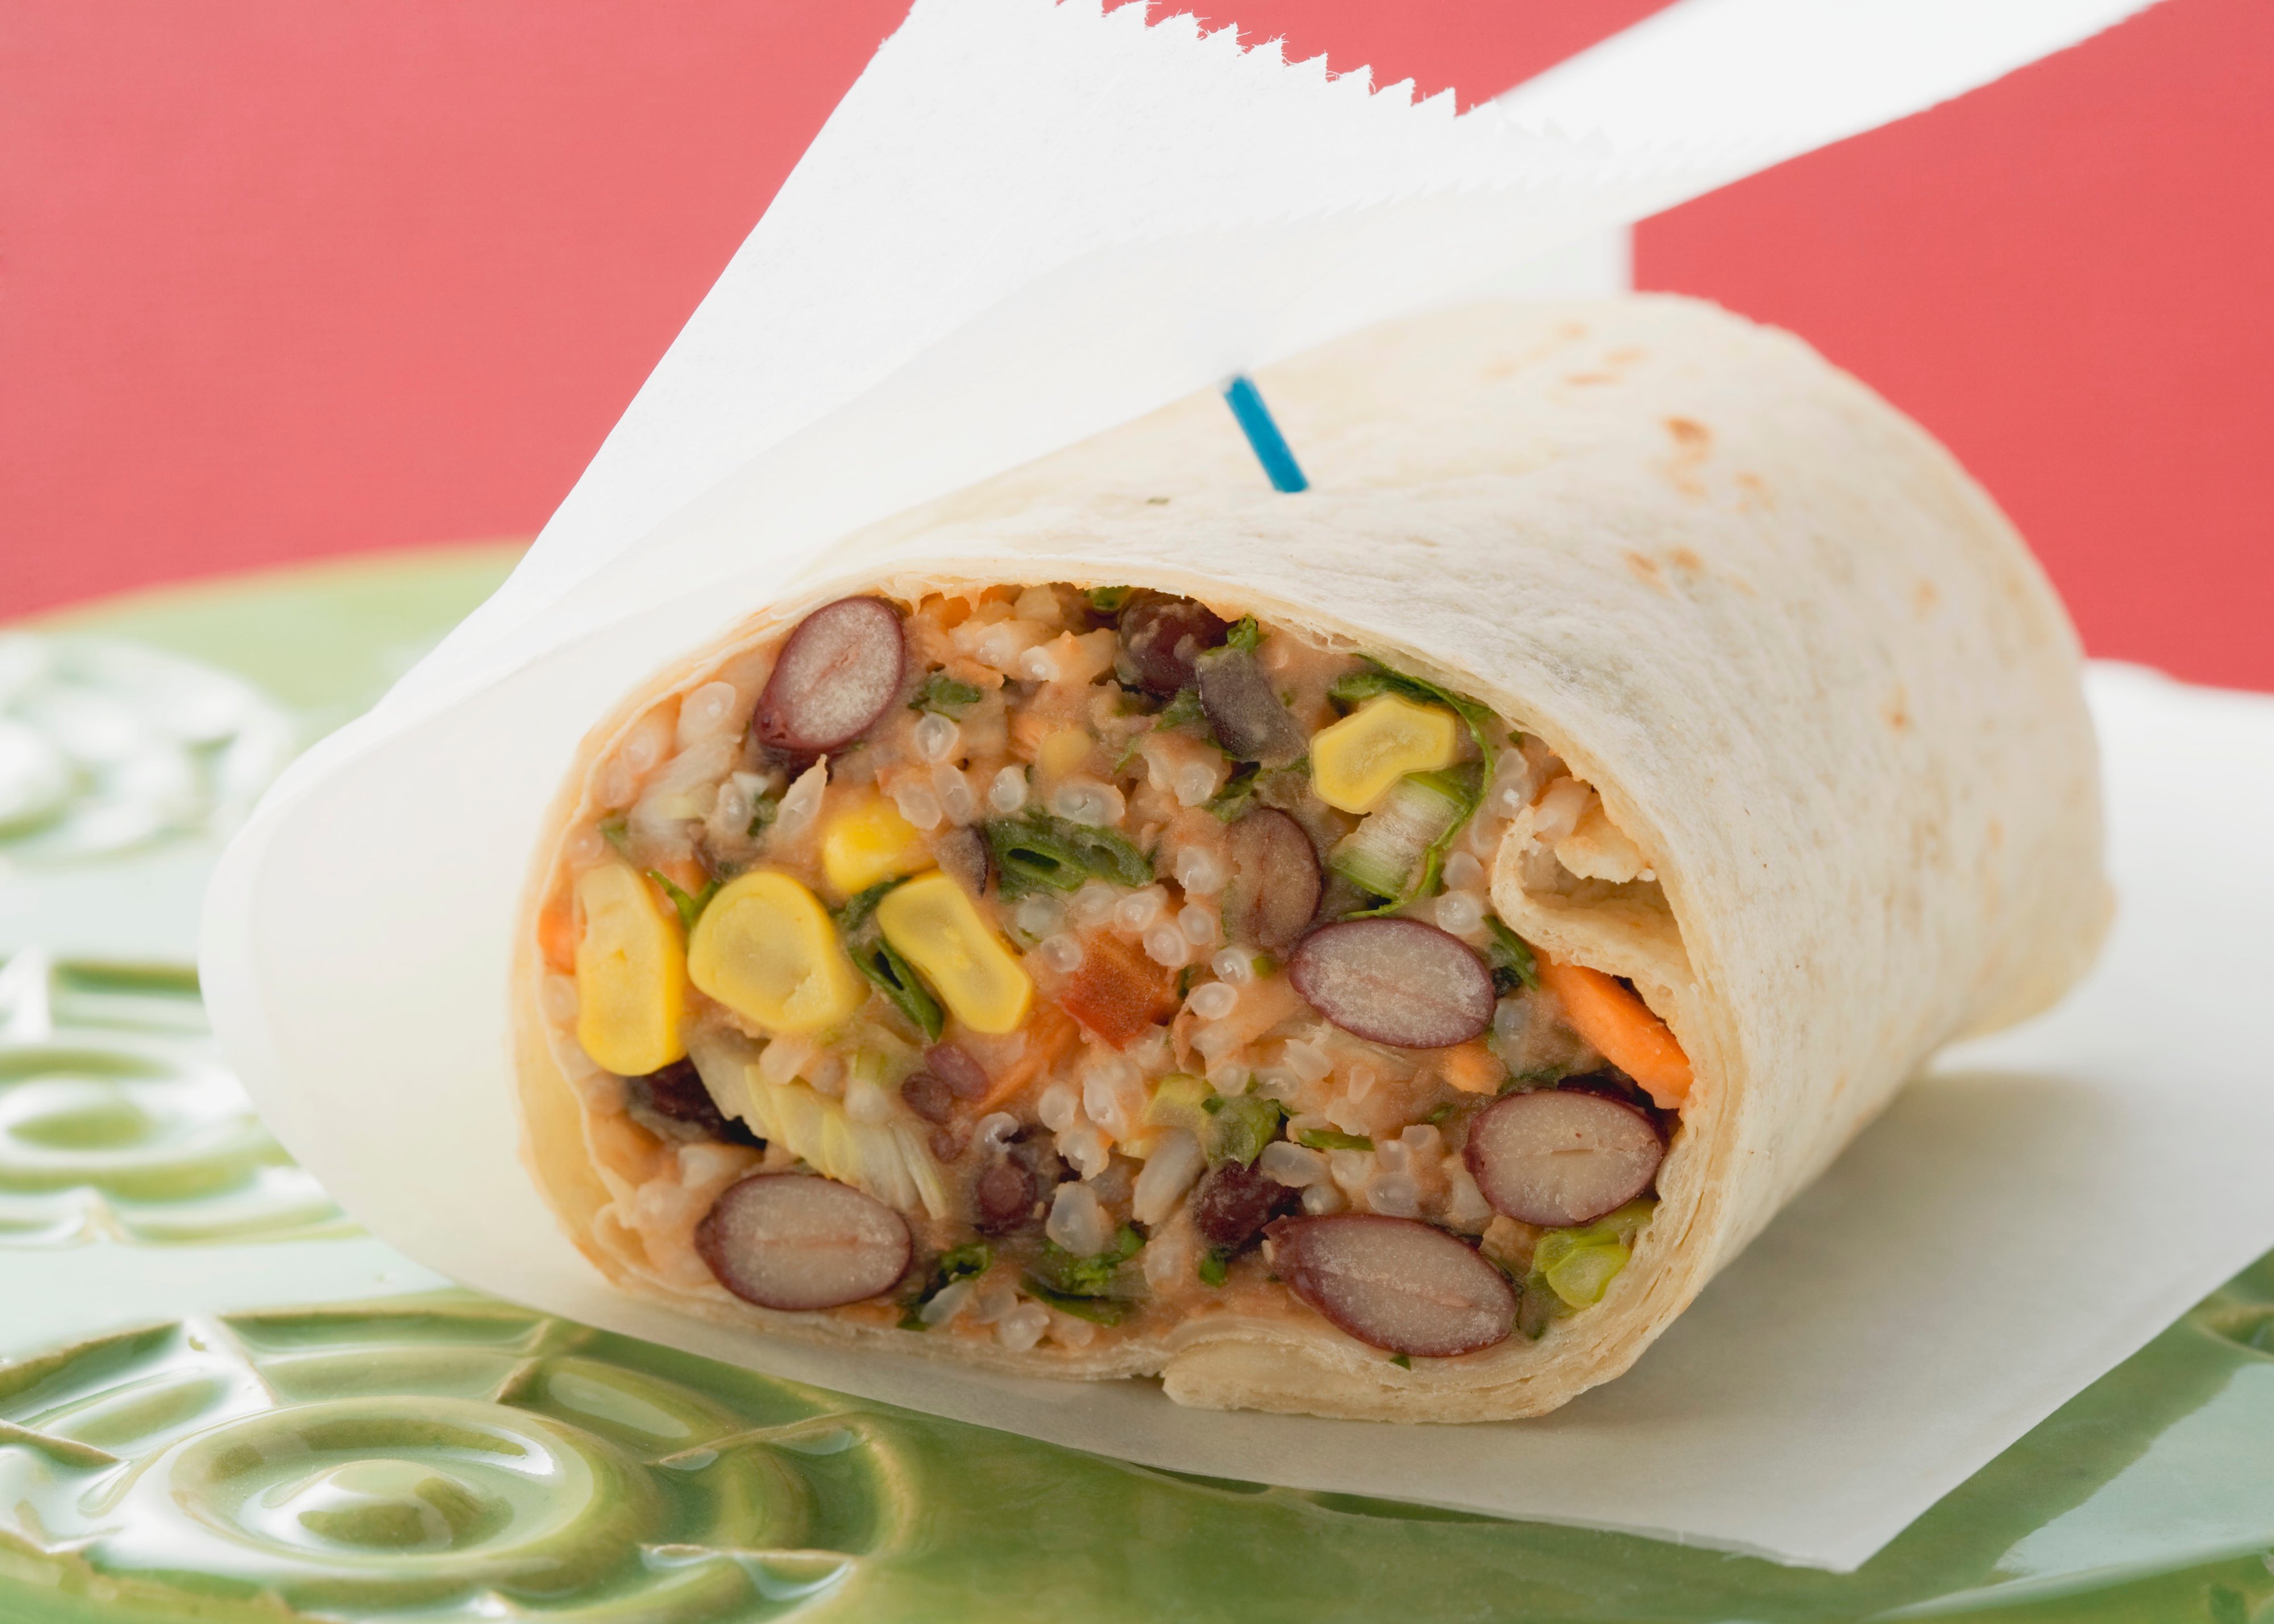 Tortilla rollup filled with beans, corn, rice, and salsa